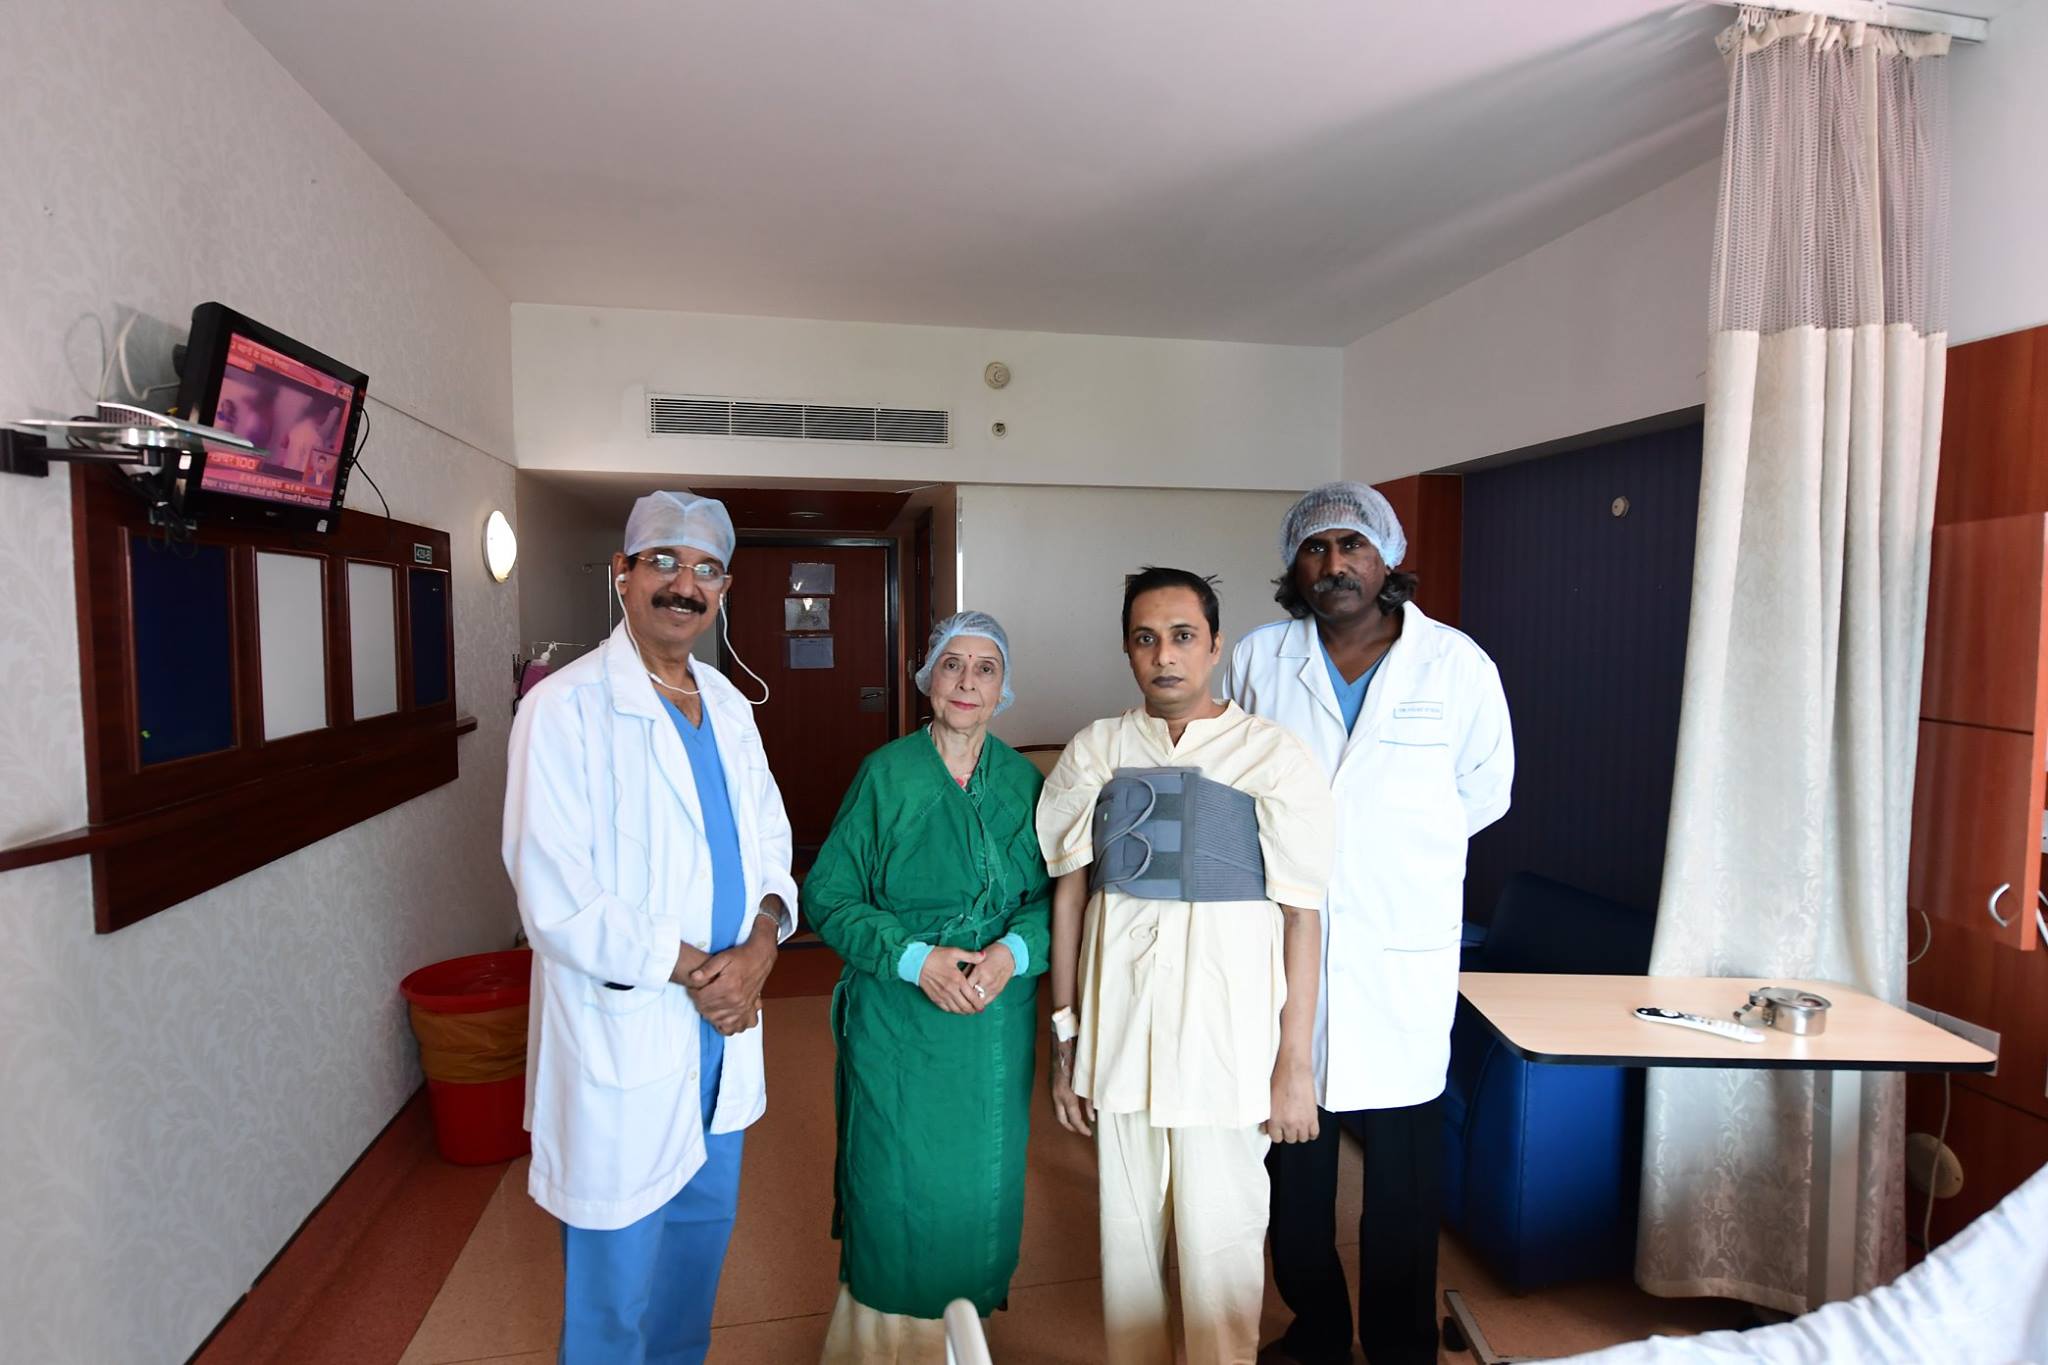 Mrs. Suman Ramesh Tulsiani with Dr. Panda, Dr. Vijay D’Silva & the heart transplant recipient at the Asian Heart Hospital - Bandra, after the successful completion of the surgery and discharge of the patient. 